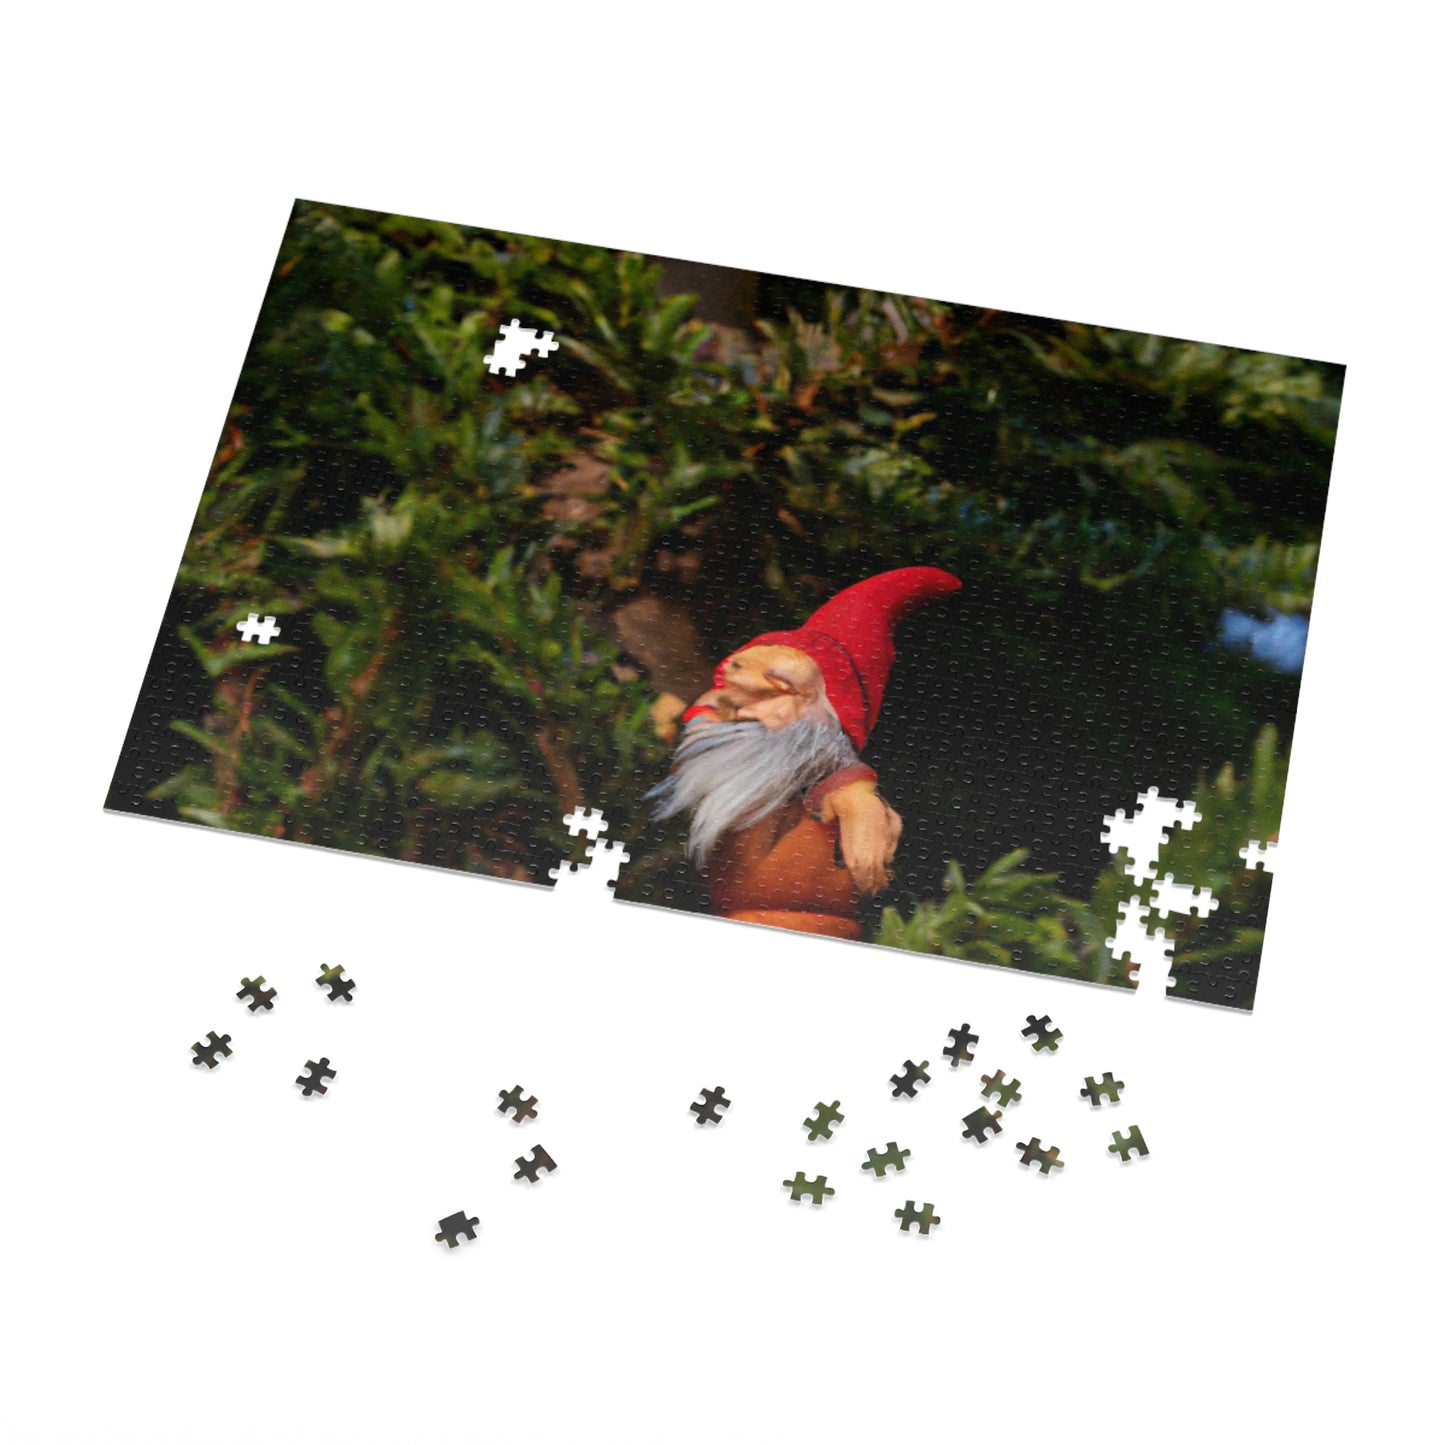 The Gnome's High-Rise Adventure - The Alien Jigsaw Puzzle